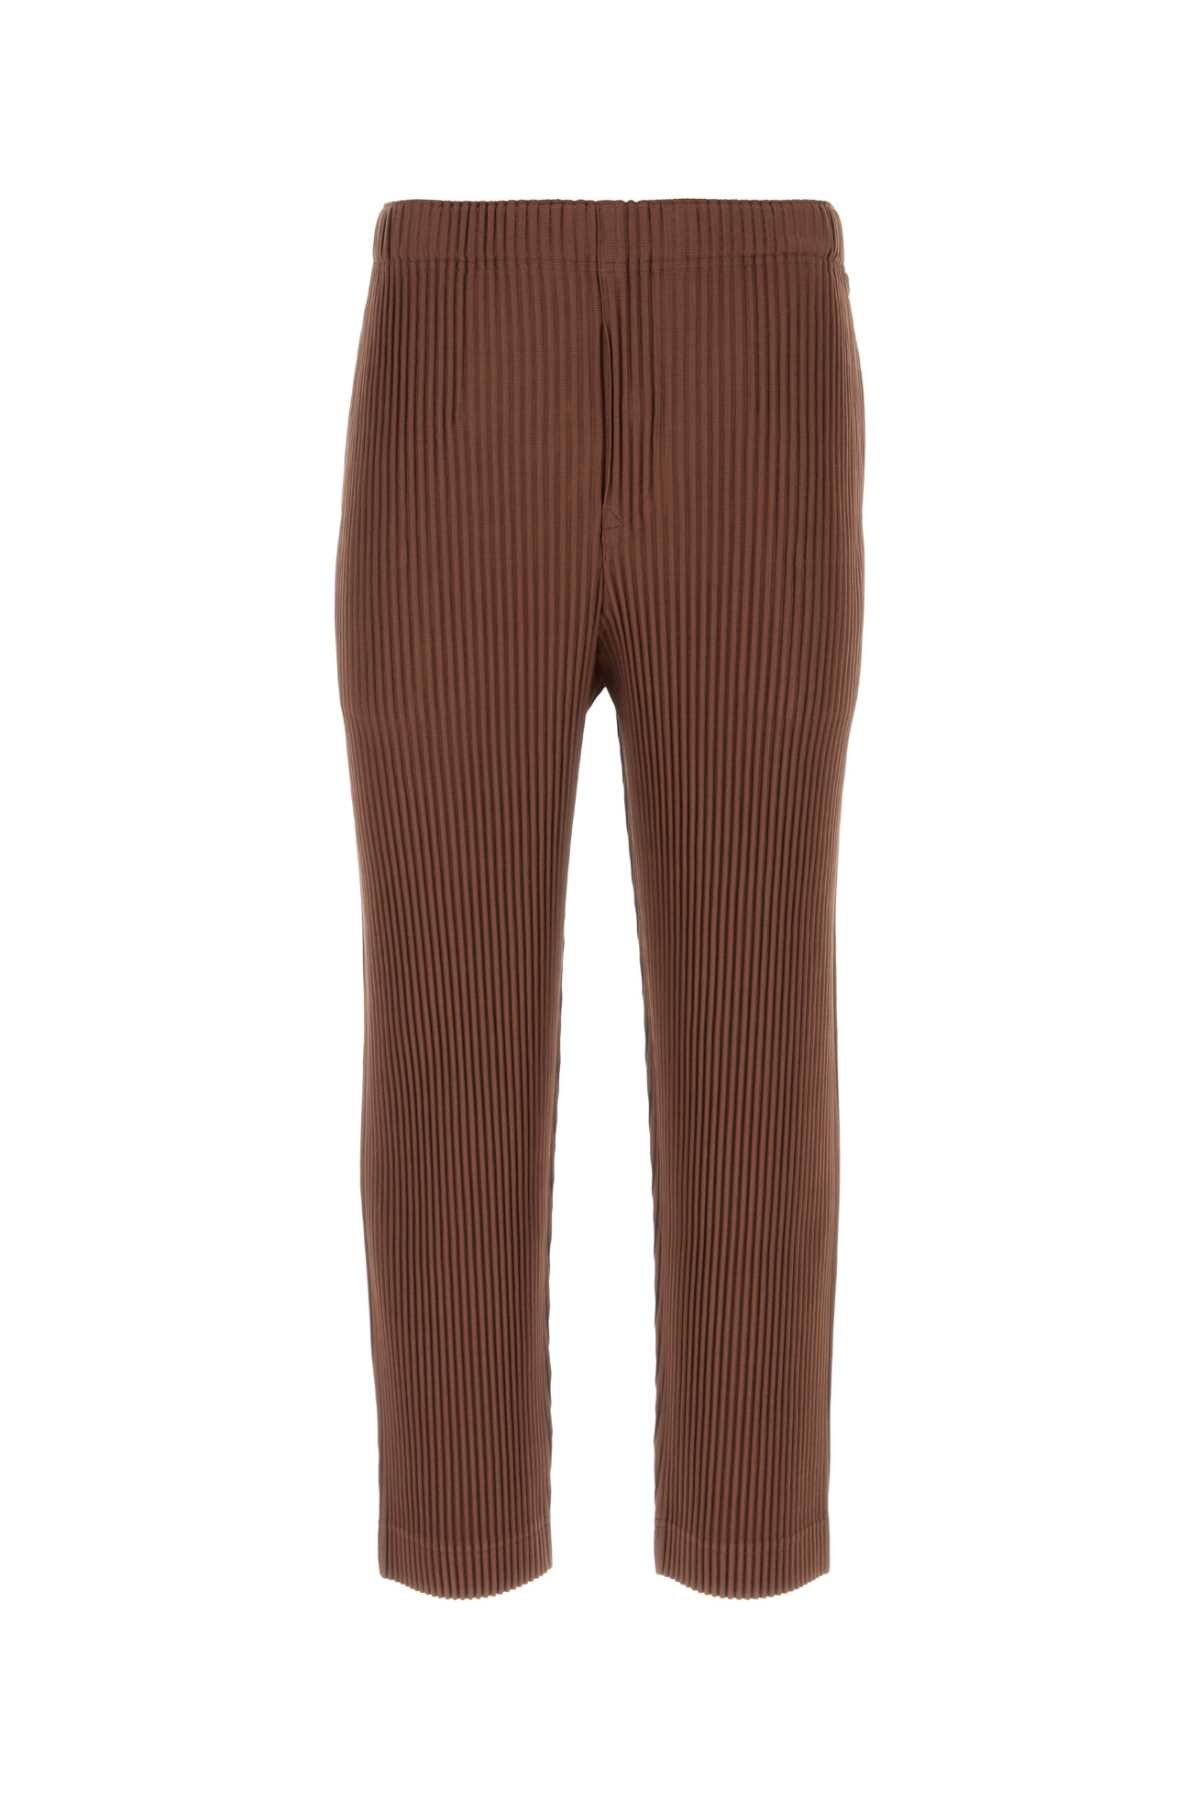 Homme Plissé Issey Miyake Brown Polyester Pant